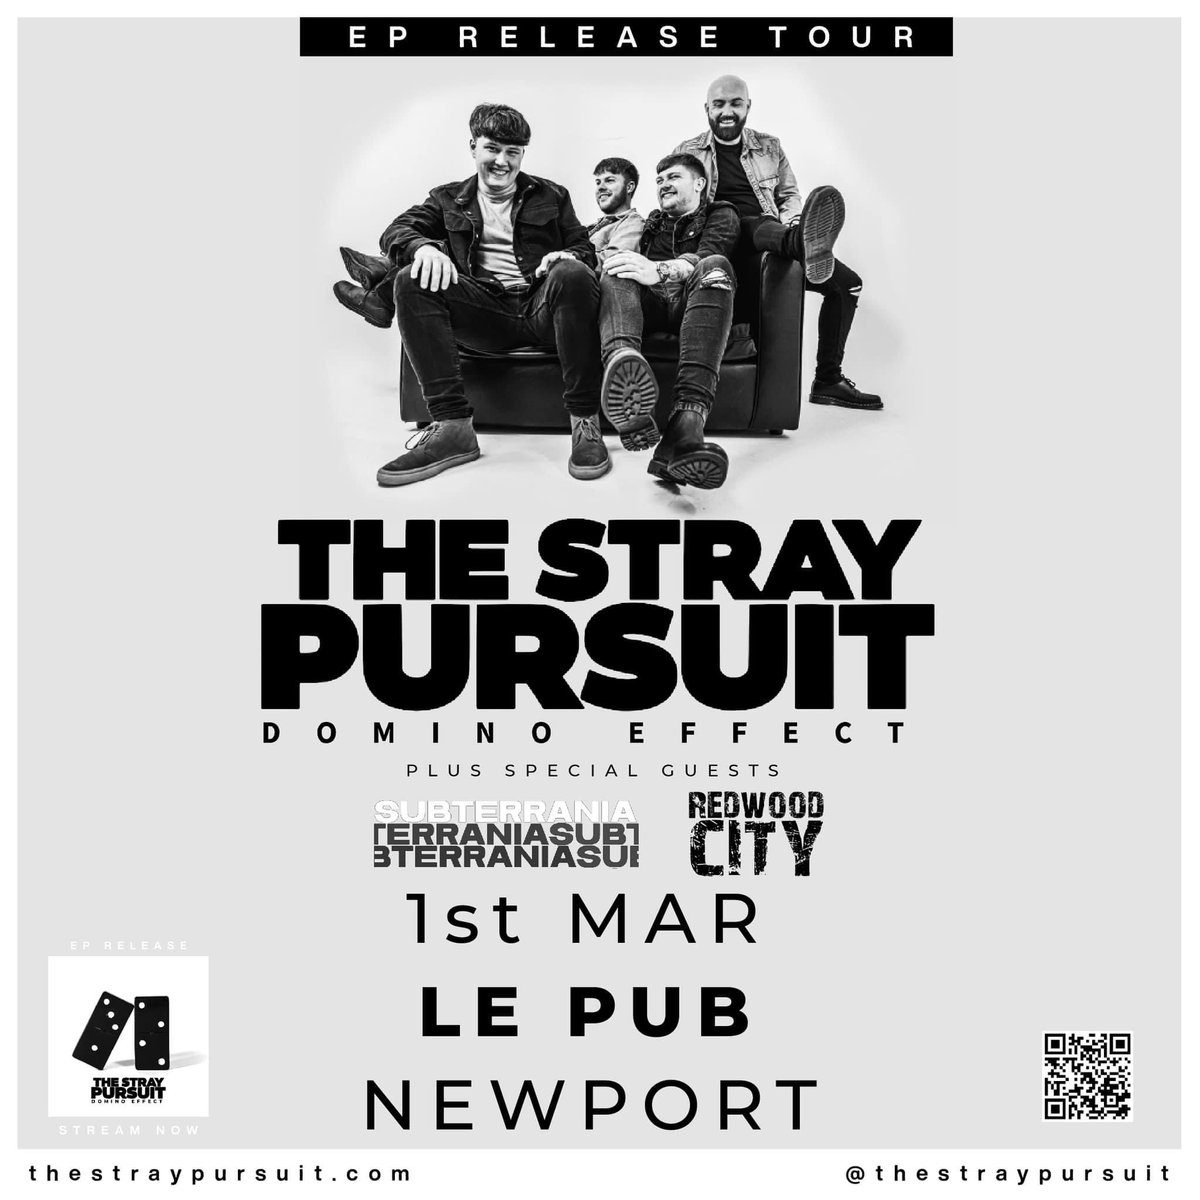 Not long to go until we support @thestraypursuit for the last time on The Domino Effect Tour at Newport @Lepub We will be joined with Redwood City see you there!